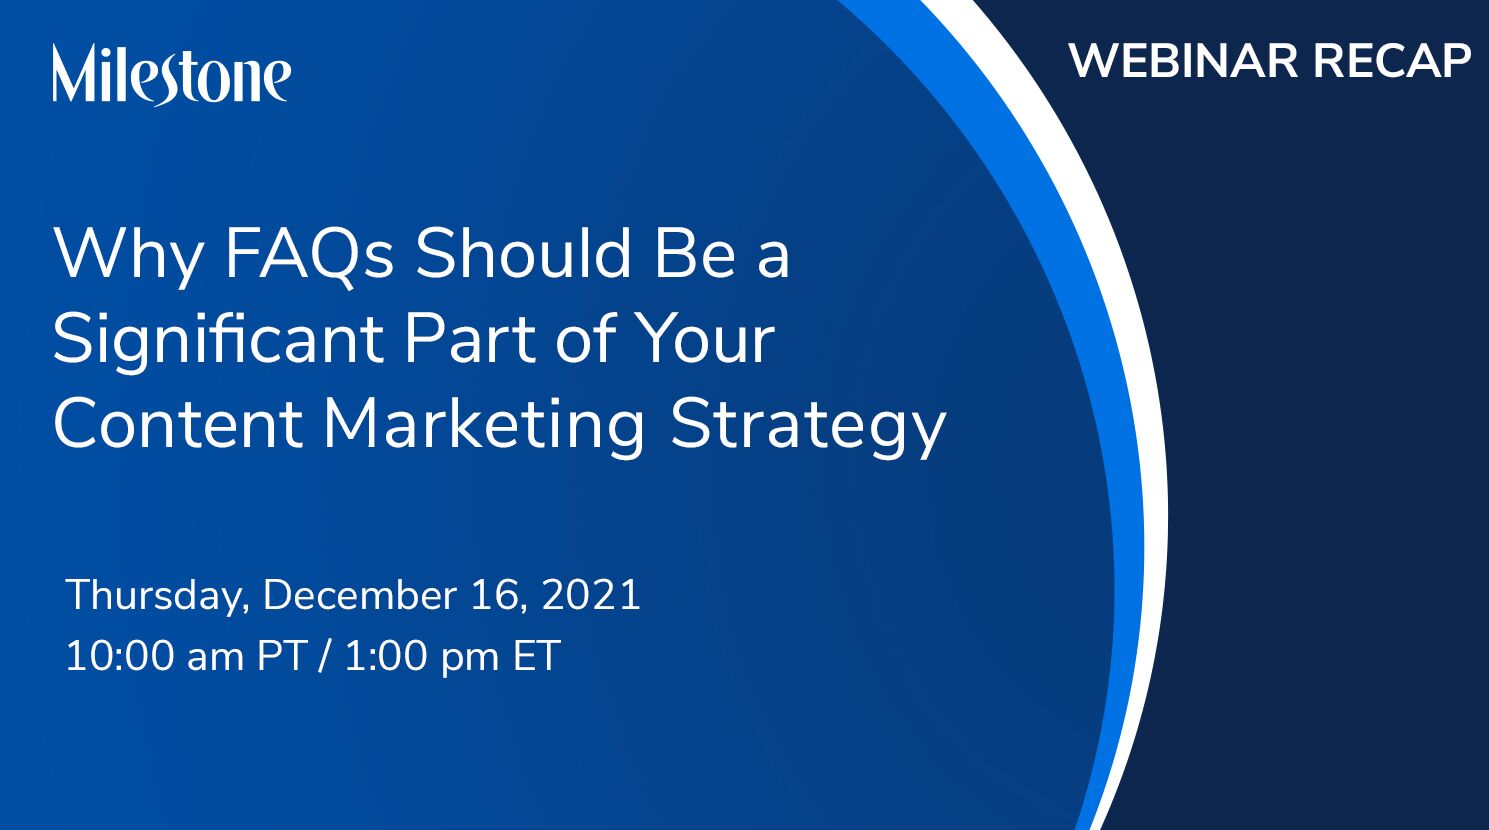 Milestone Webinar Recap: Why FAQs Should Be a Significant Part of Your Content Marketing Strategy